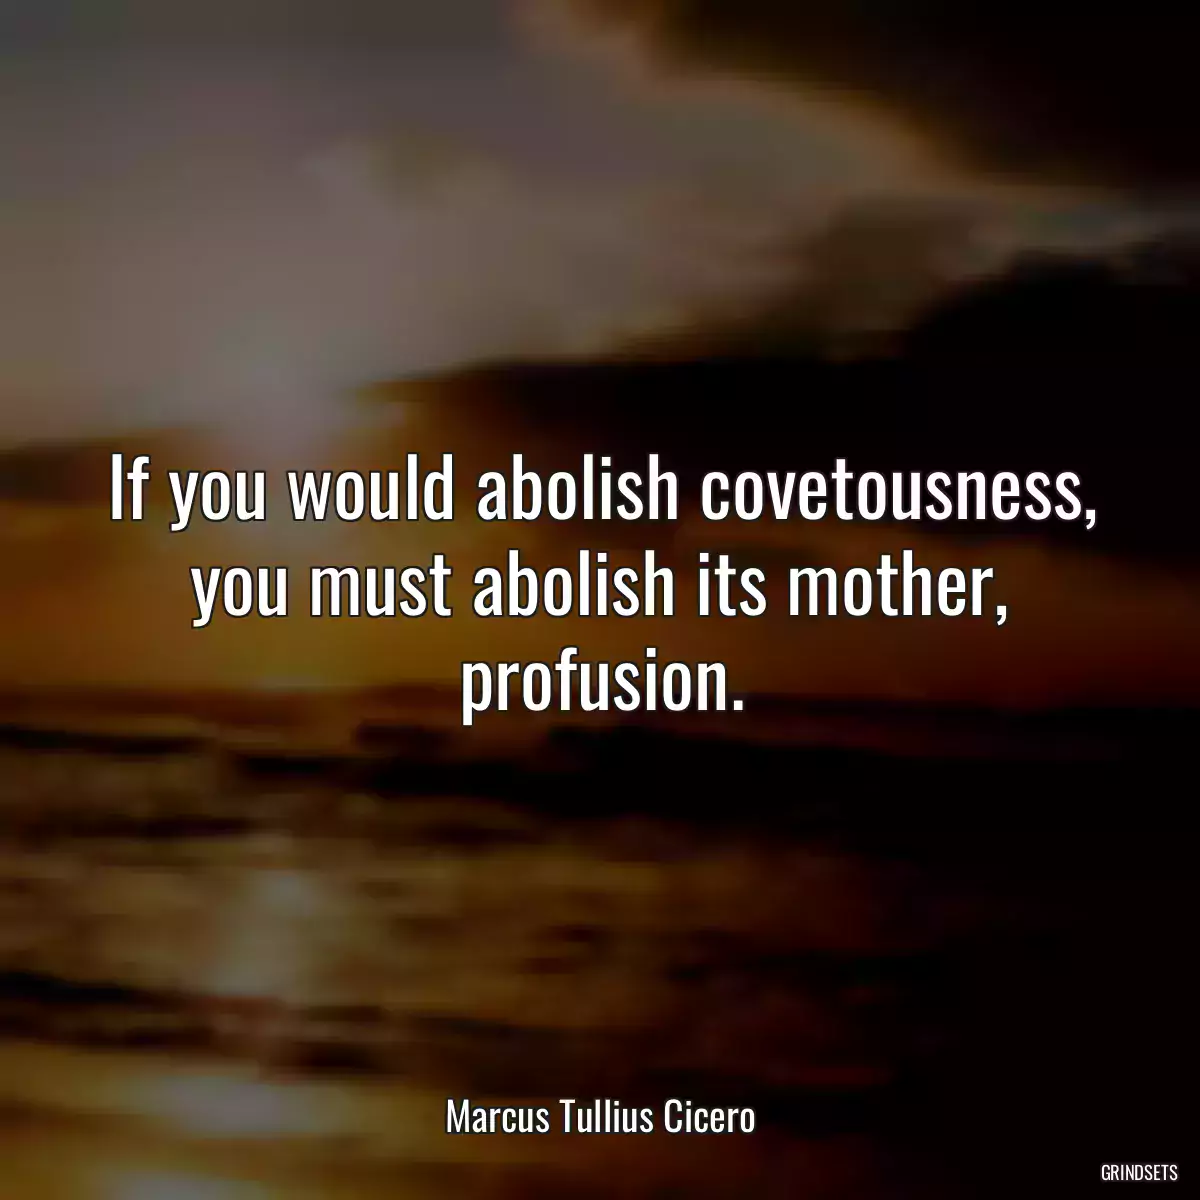 If you would abolish covetousness, you must abolish its mother, profusion.